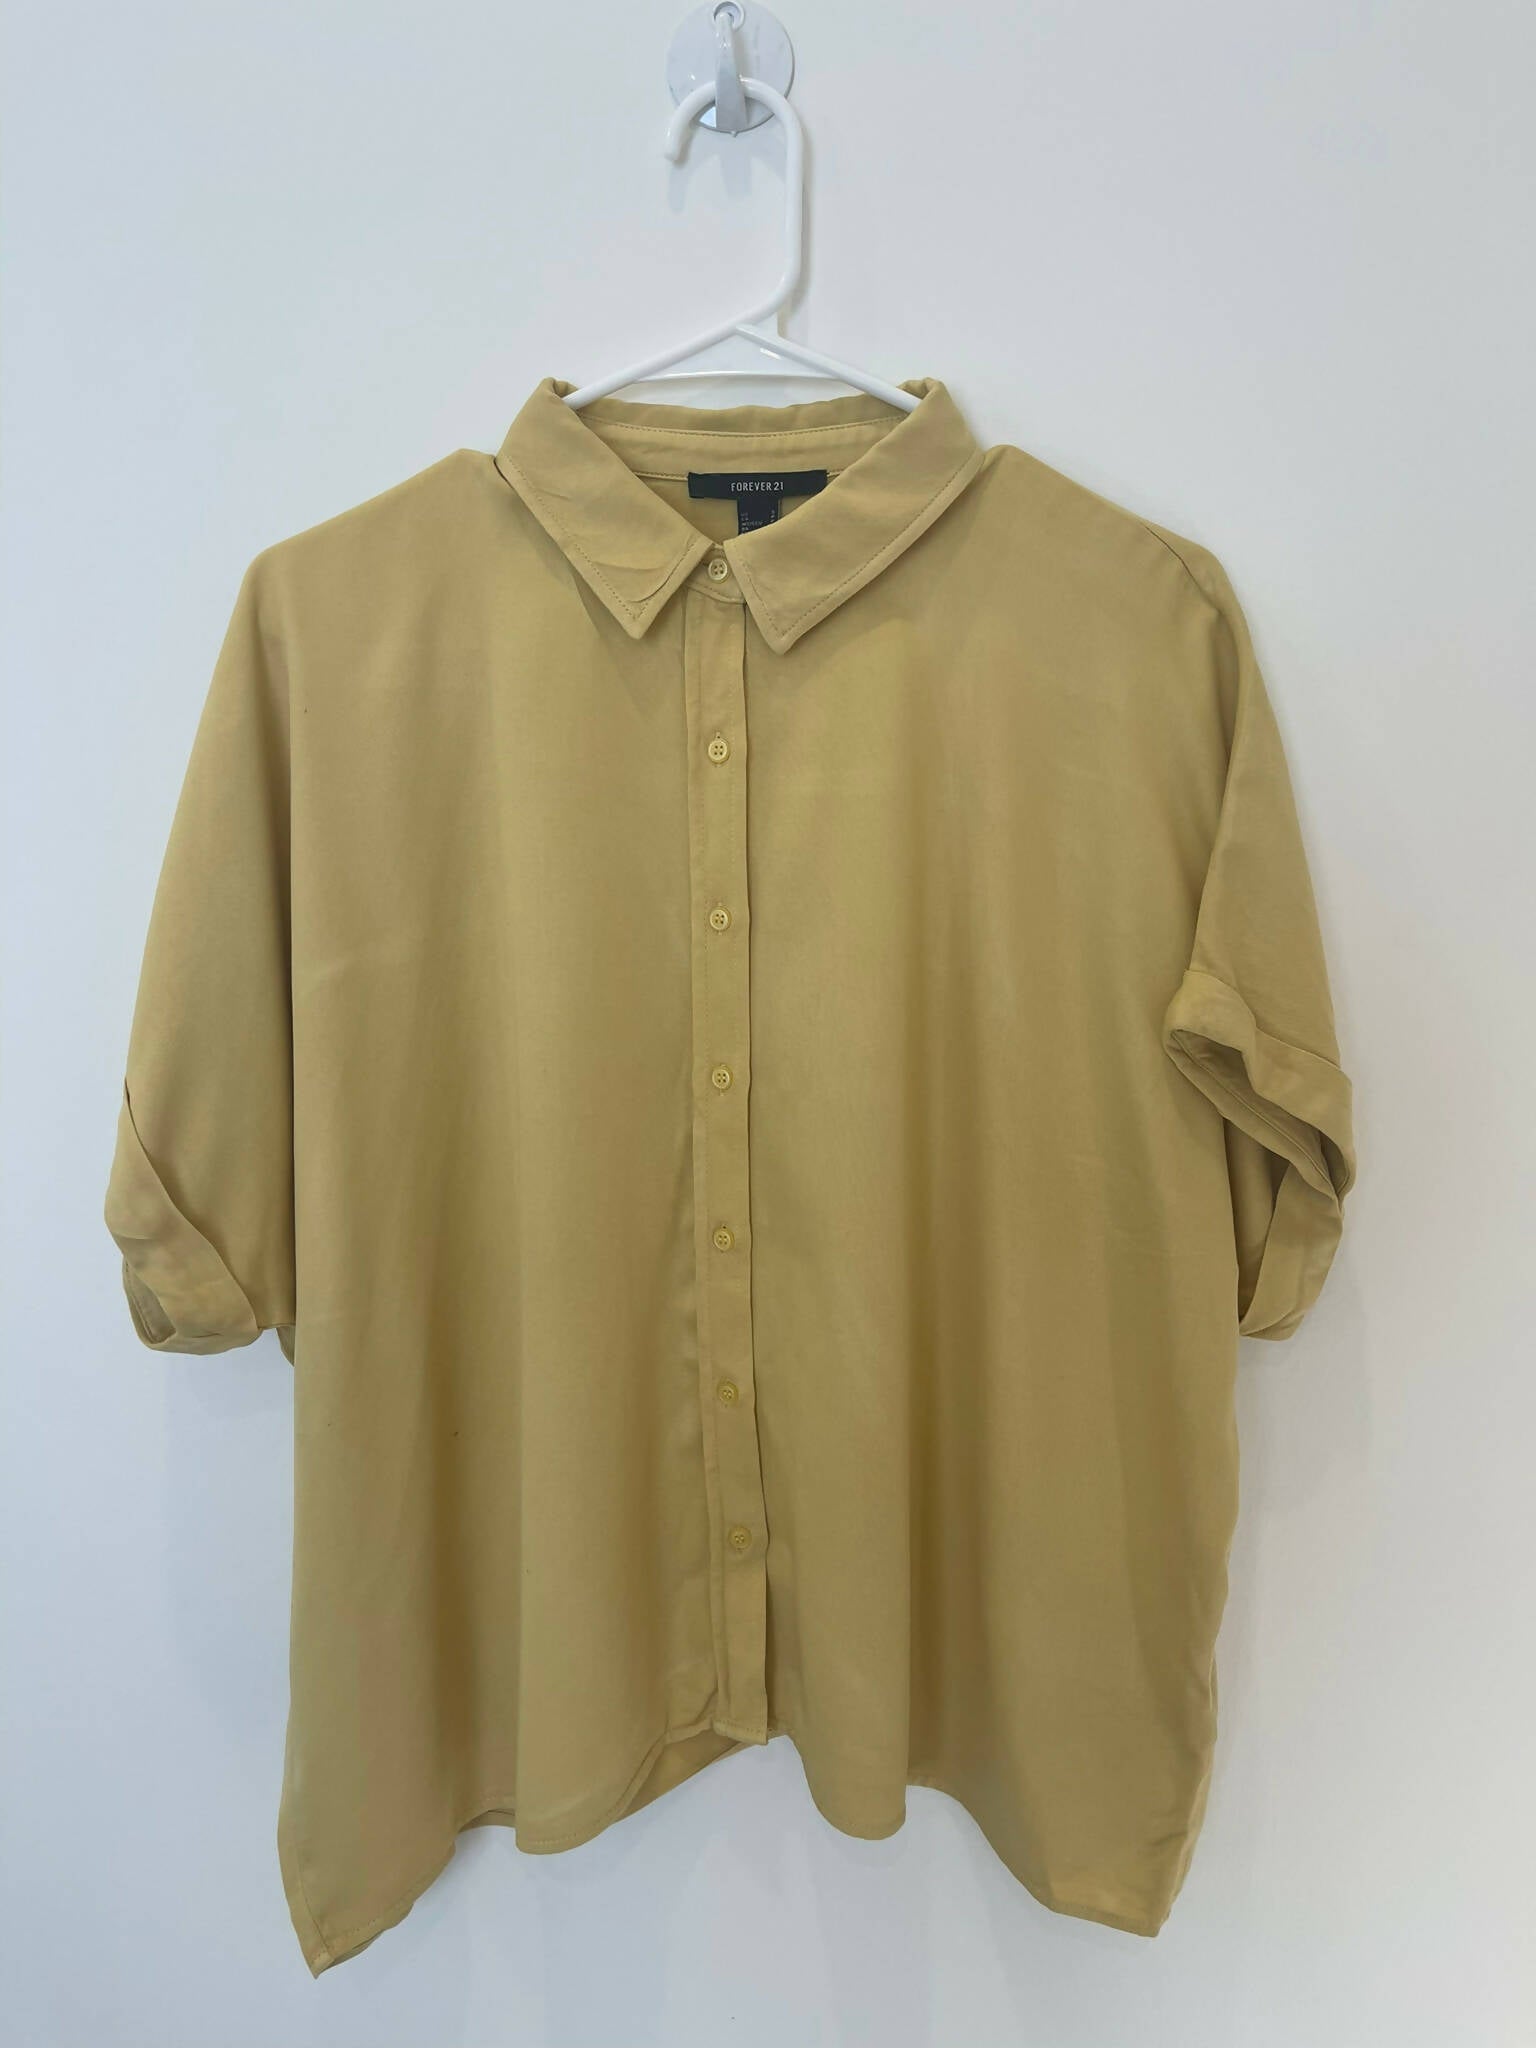 Forever 21 | Yellow Button down Top | Women Tops & Shirts | Preloved